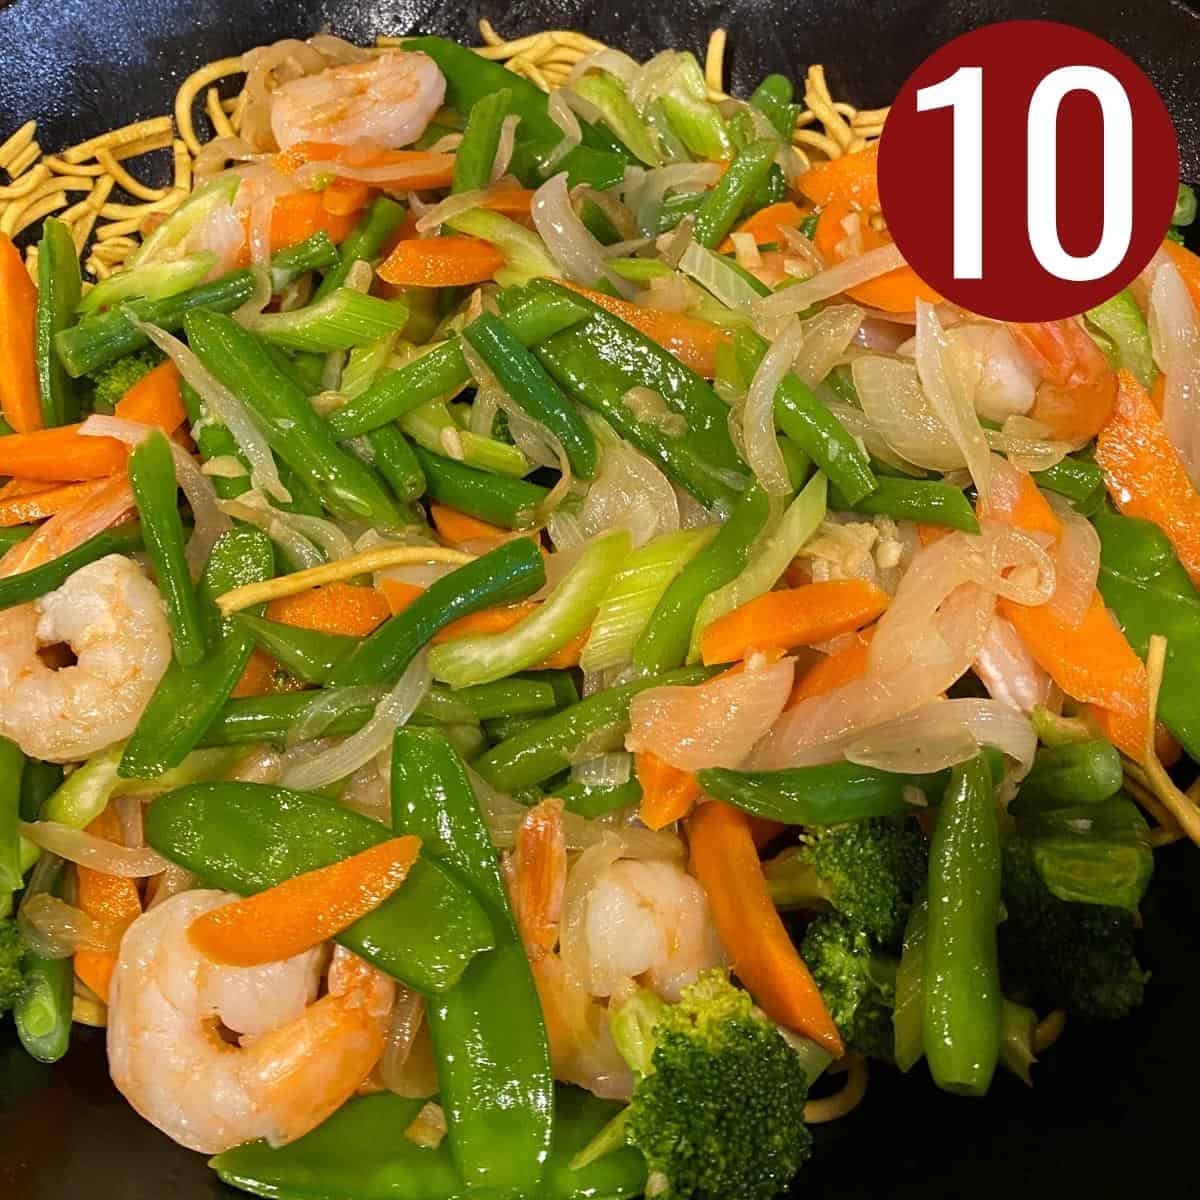 Step 10 cooked shrimp with vegetables for Pancit Canton in a wok.